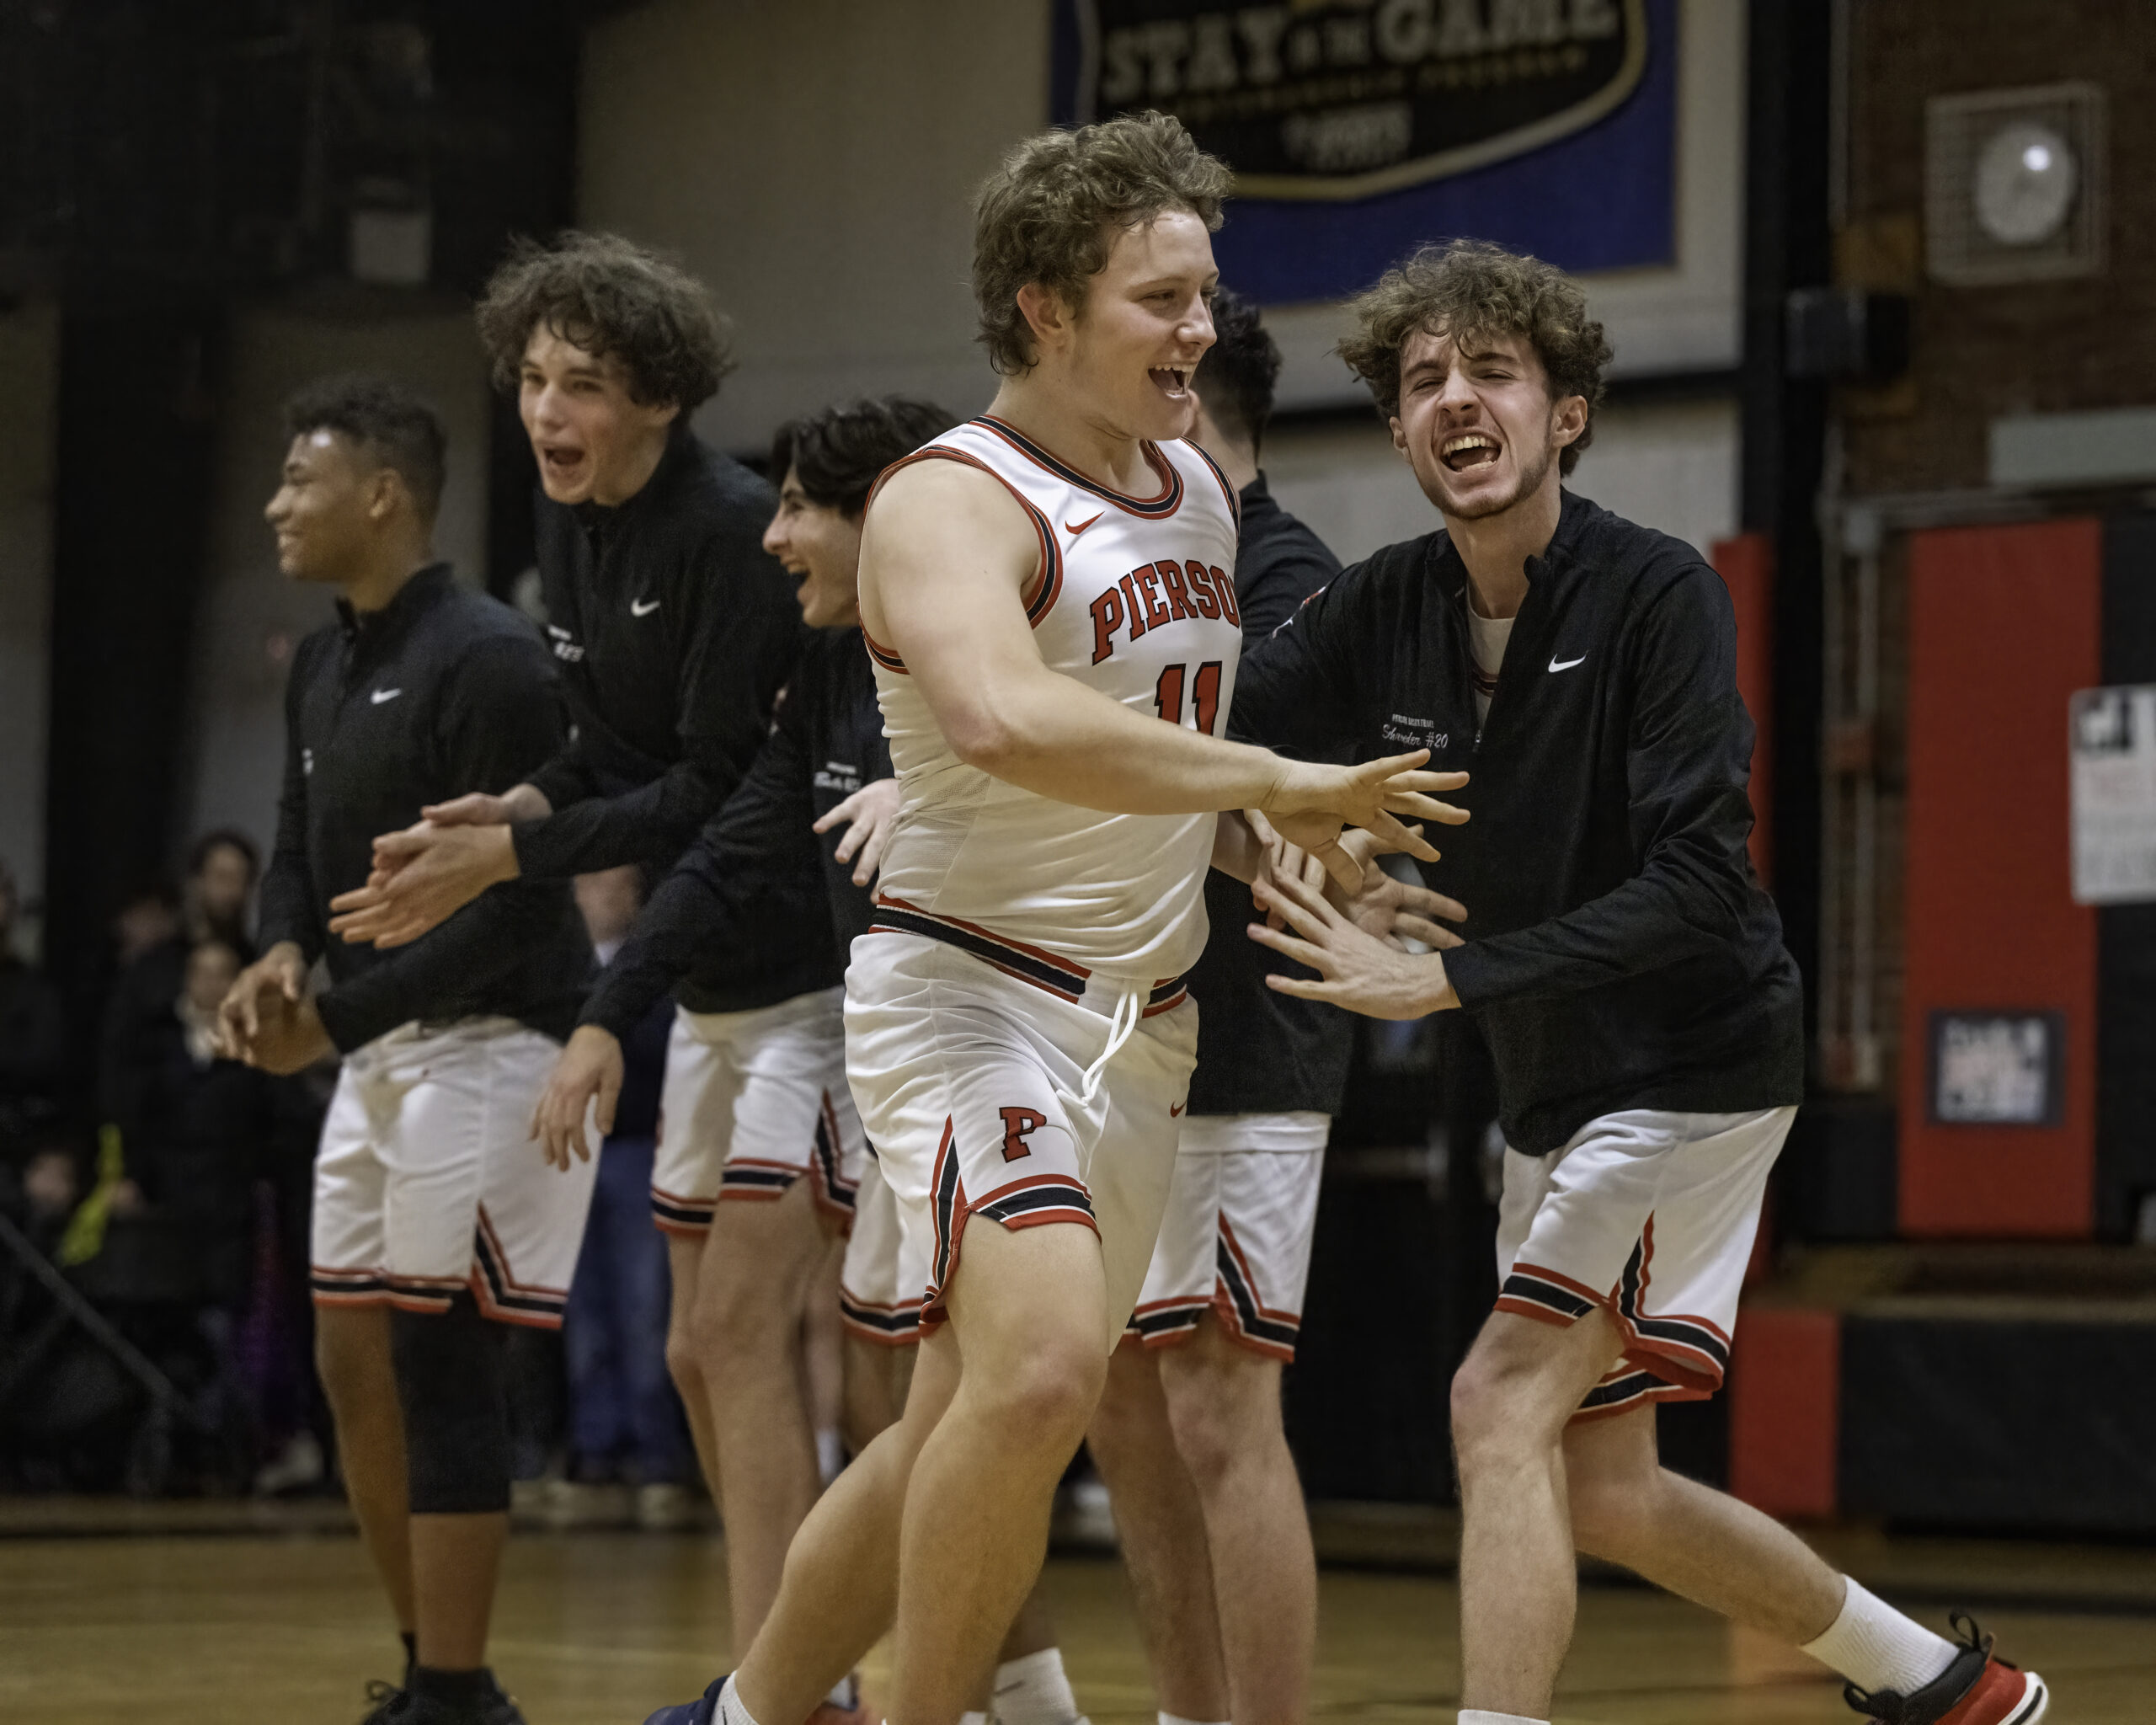 Pierson senior Logan Hartstein is pumped up and congratulated by teammates during player introductions prior to Friday night's game.   MARIANNE BARNETT